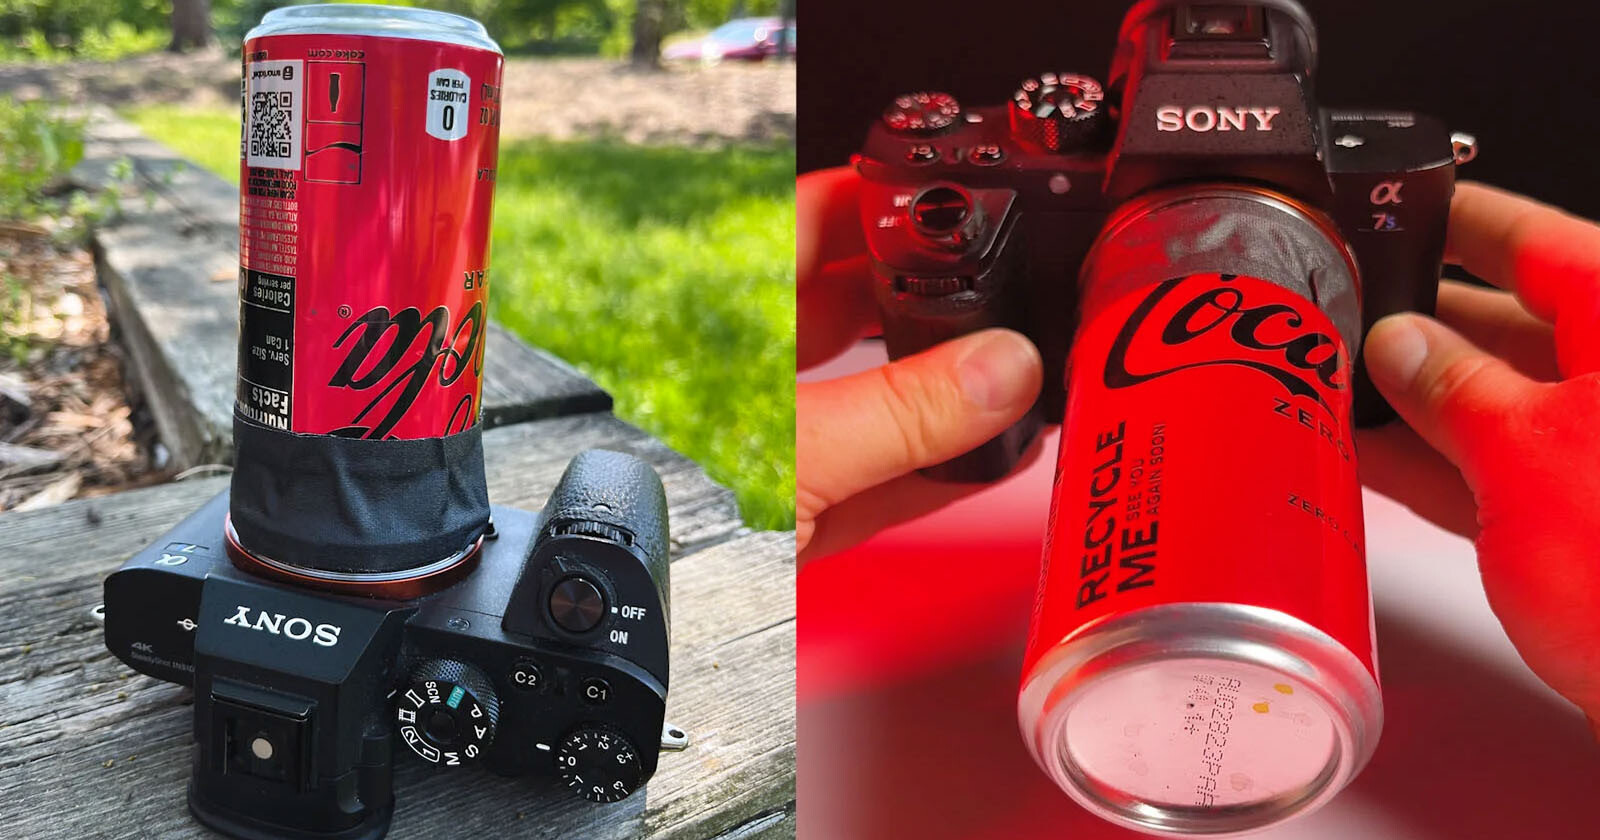 Fun DIY Pinhole Lens Requires a Soda Can, Tape, and a Simple Lens Adapter